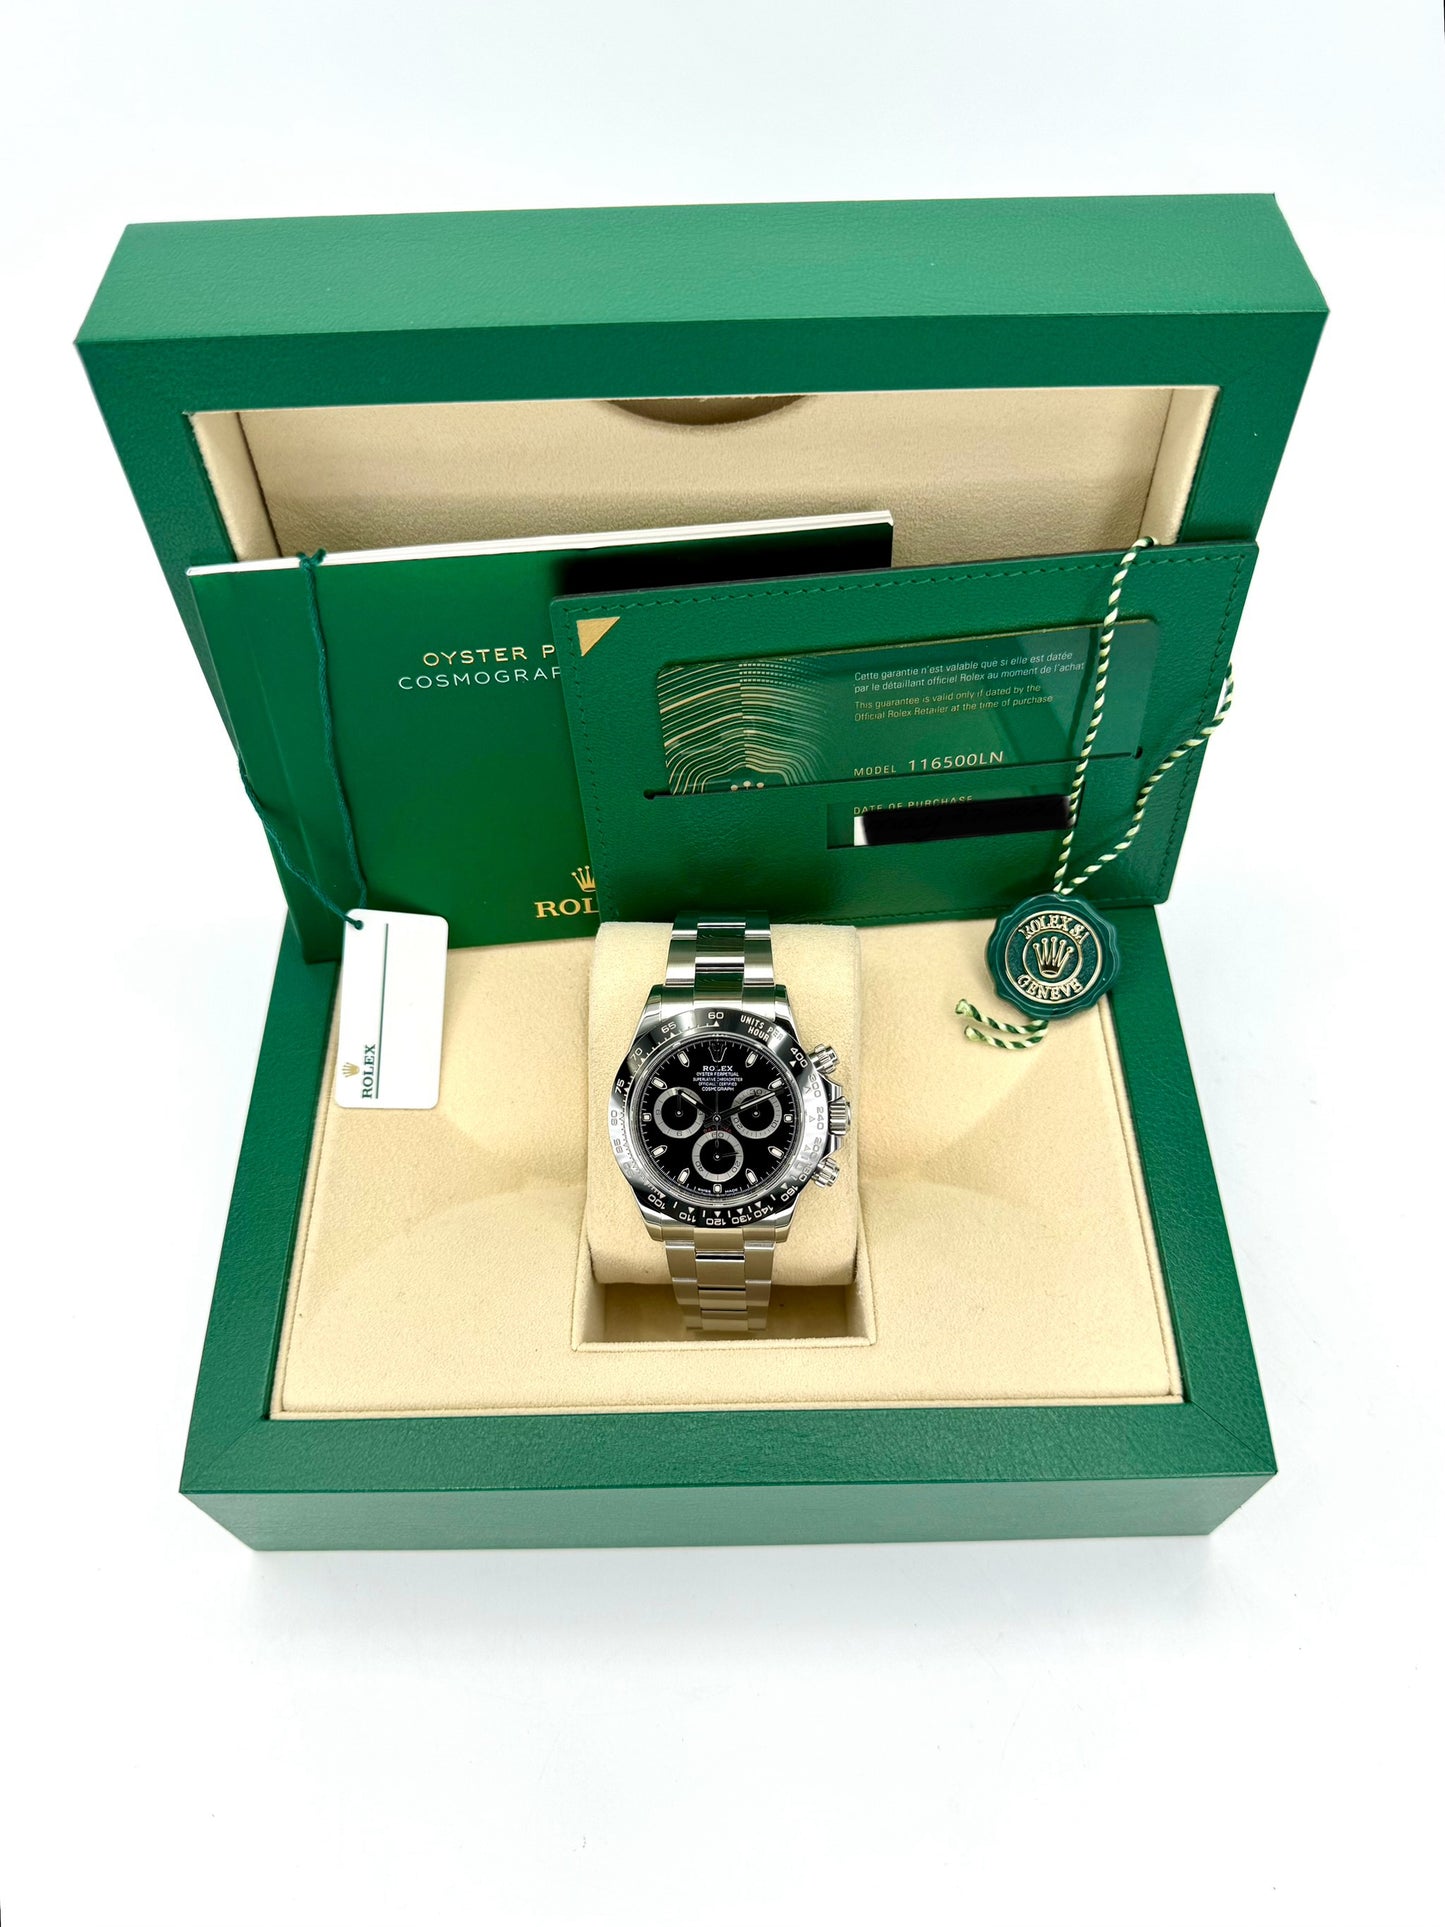 2021 Rolex Daytona 40mm 116500LN Stainless Steel Black Dial - MyWatchLLC